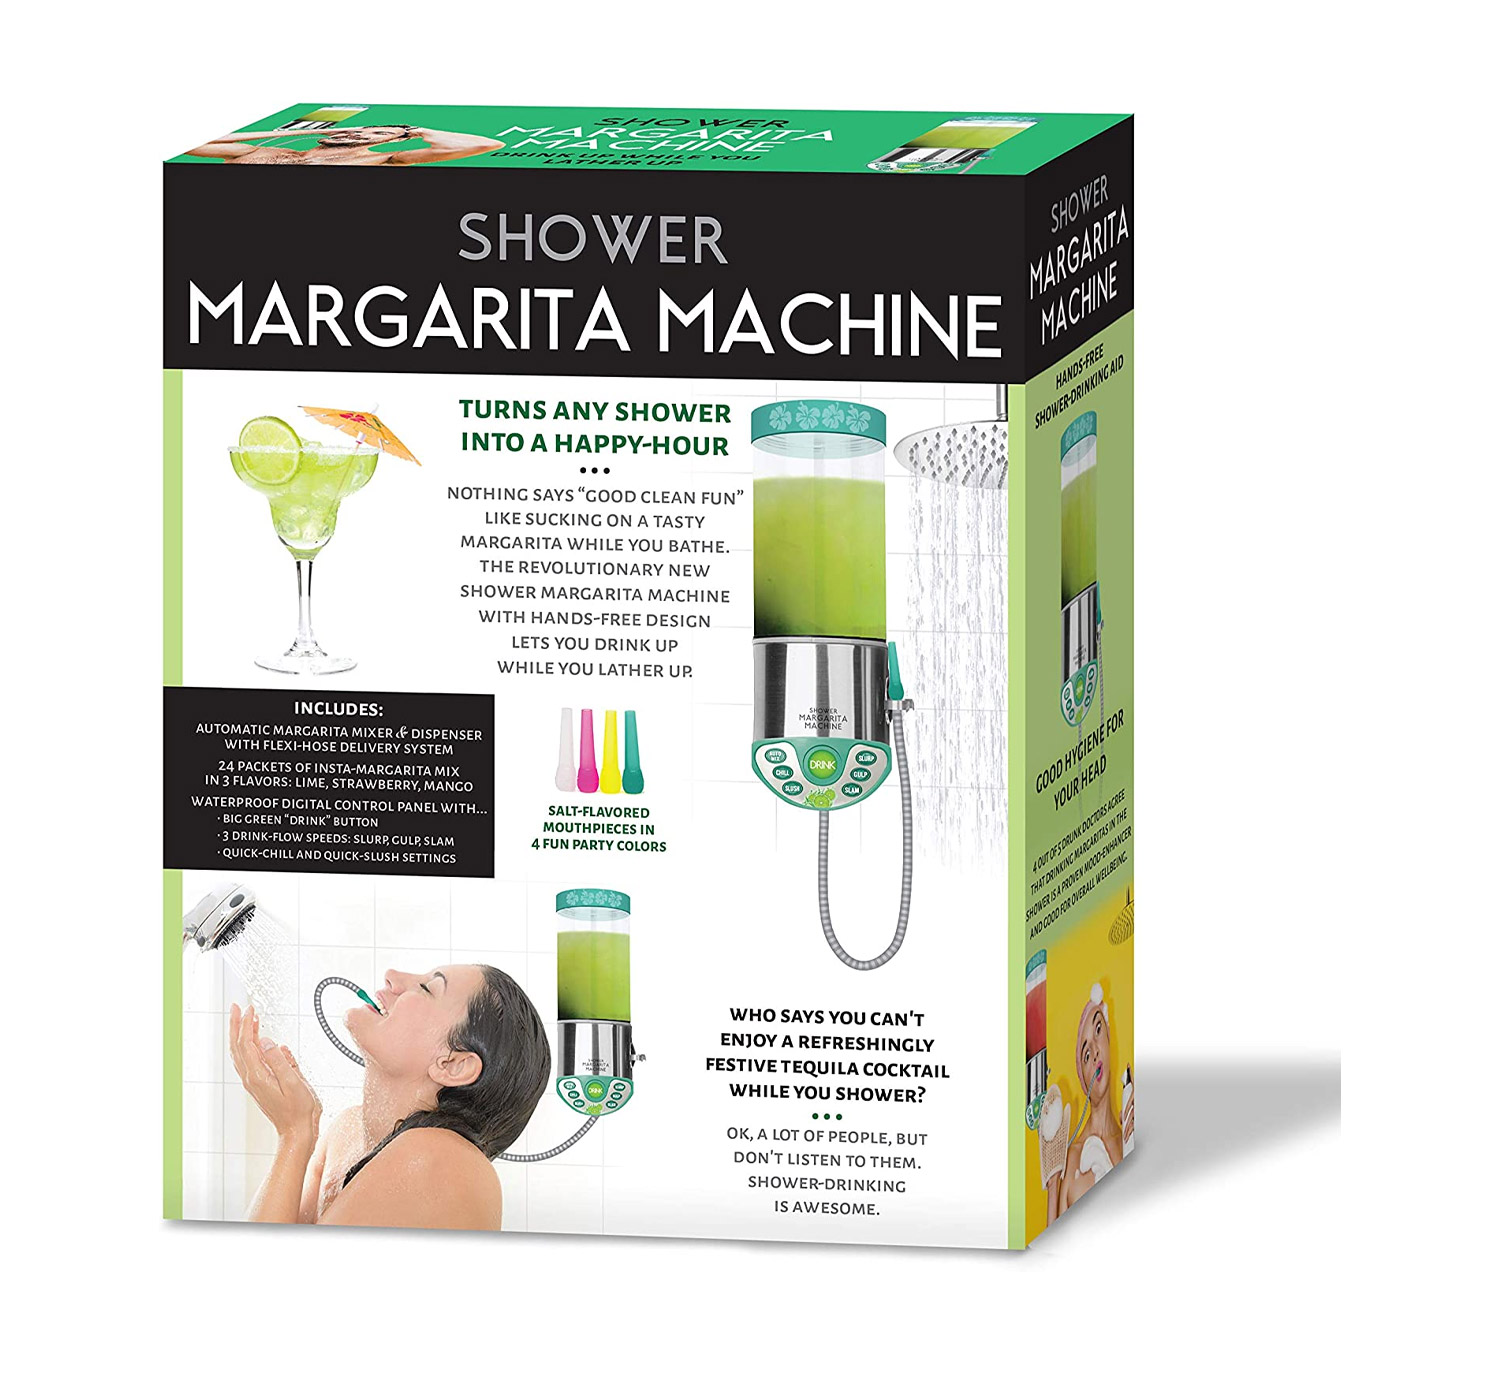 This Shower Margarita Machine Gets You Boozed Up In The Shower Hands-Free